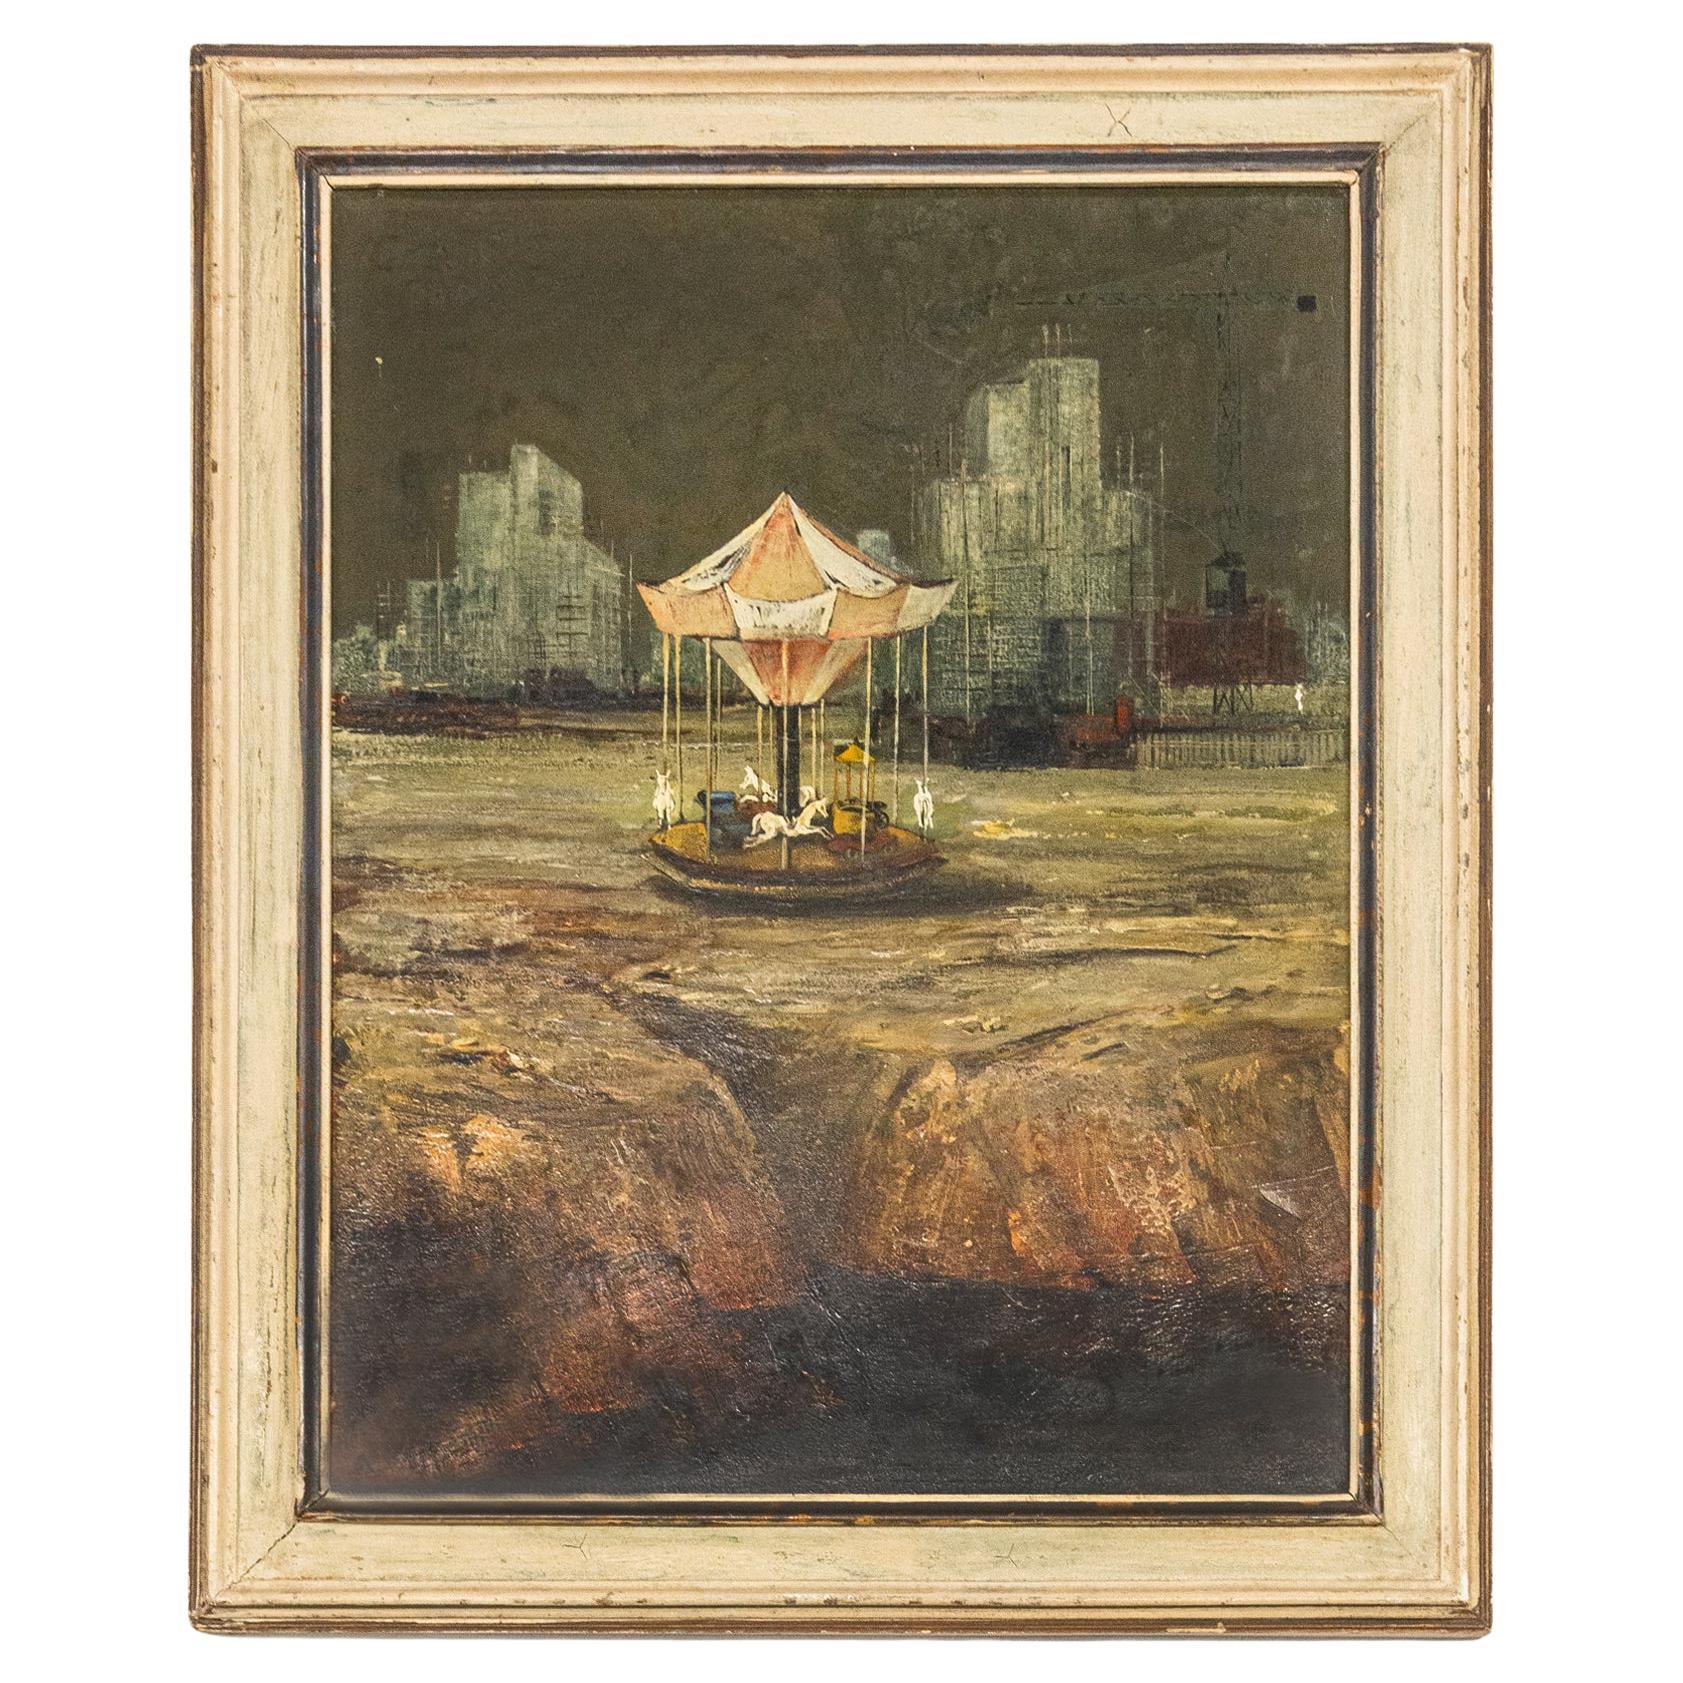 Vintage Painting with a Carousel in Texas For Sale